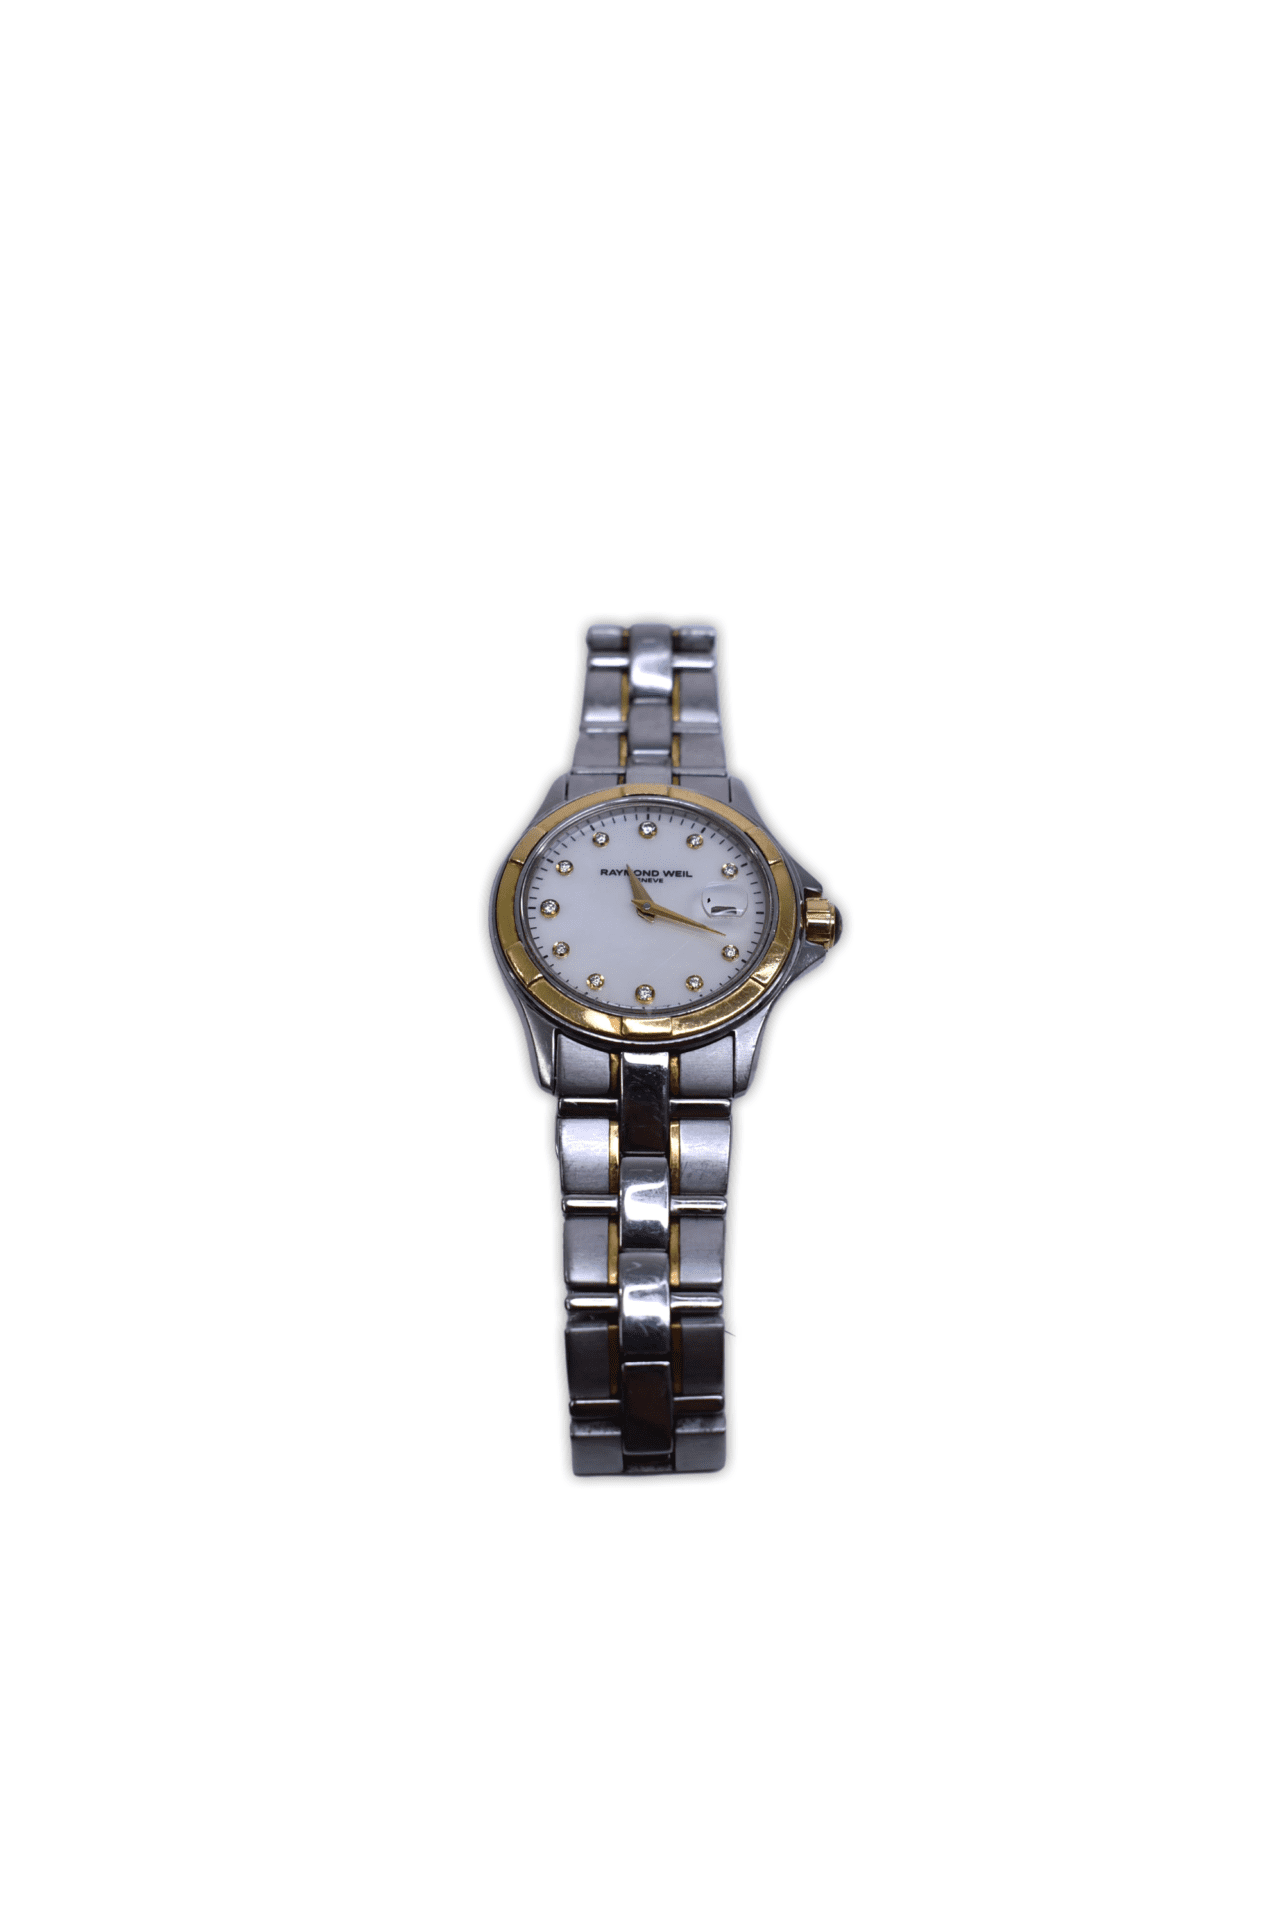 Watch 17cm inner circumference closed / 23cm watch open 